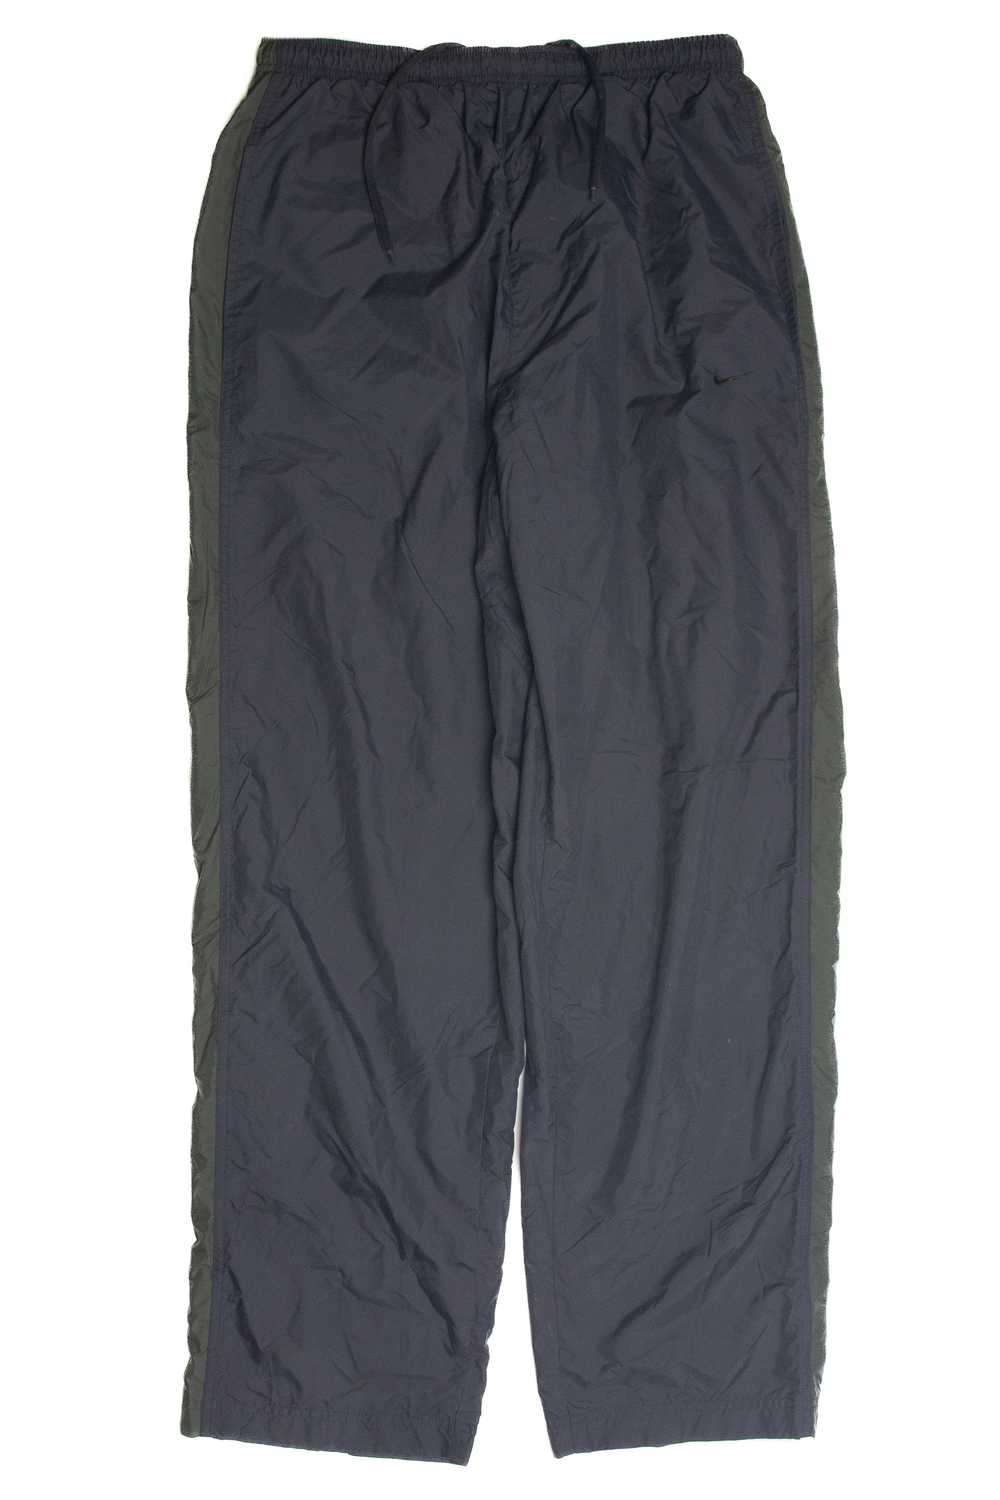 Recycled Nike Track Pants 1255 - image 1